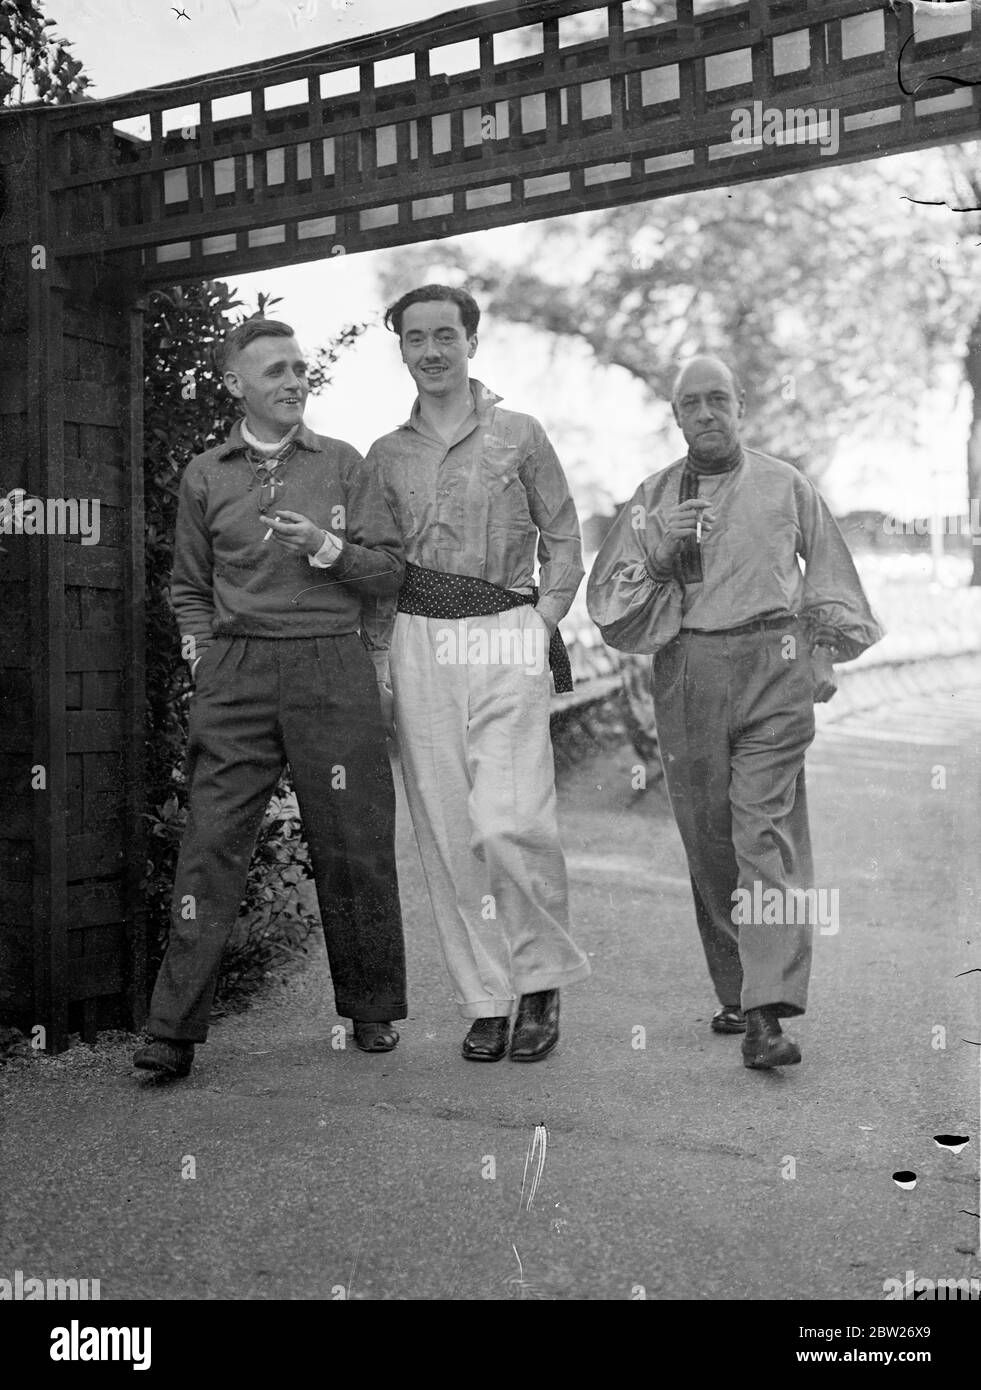 Men's dress Reform Party have reception in Regent's Park. Clad in 'reformed' masculine costume guests attended a reception of the Men's Dress Reform at the Open Air Theatre in Regent's Park, London. Photo shows, three of the guests wearing reformed dress, arriving for the reception. 29 June 1938 Stock Photo